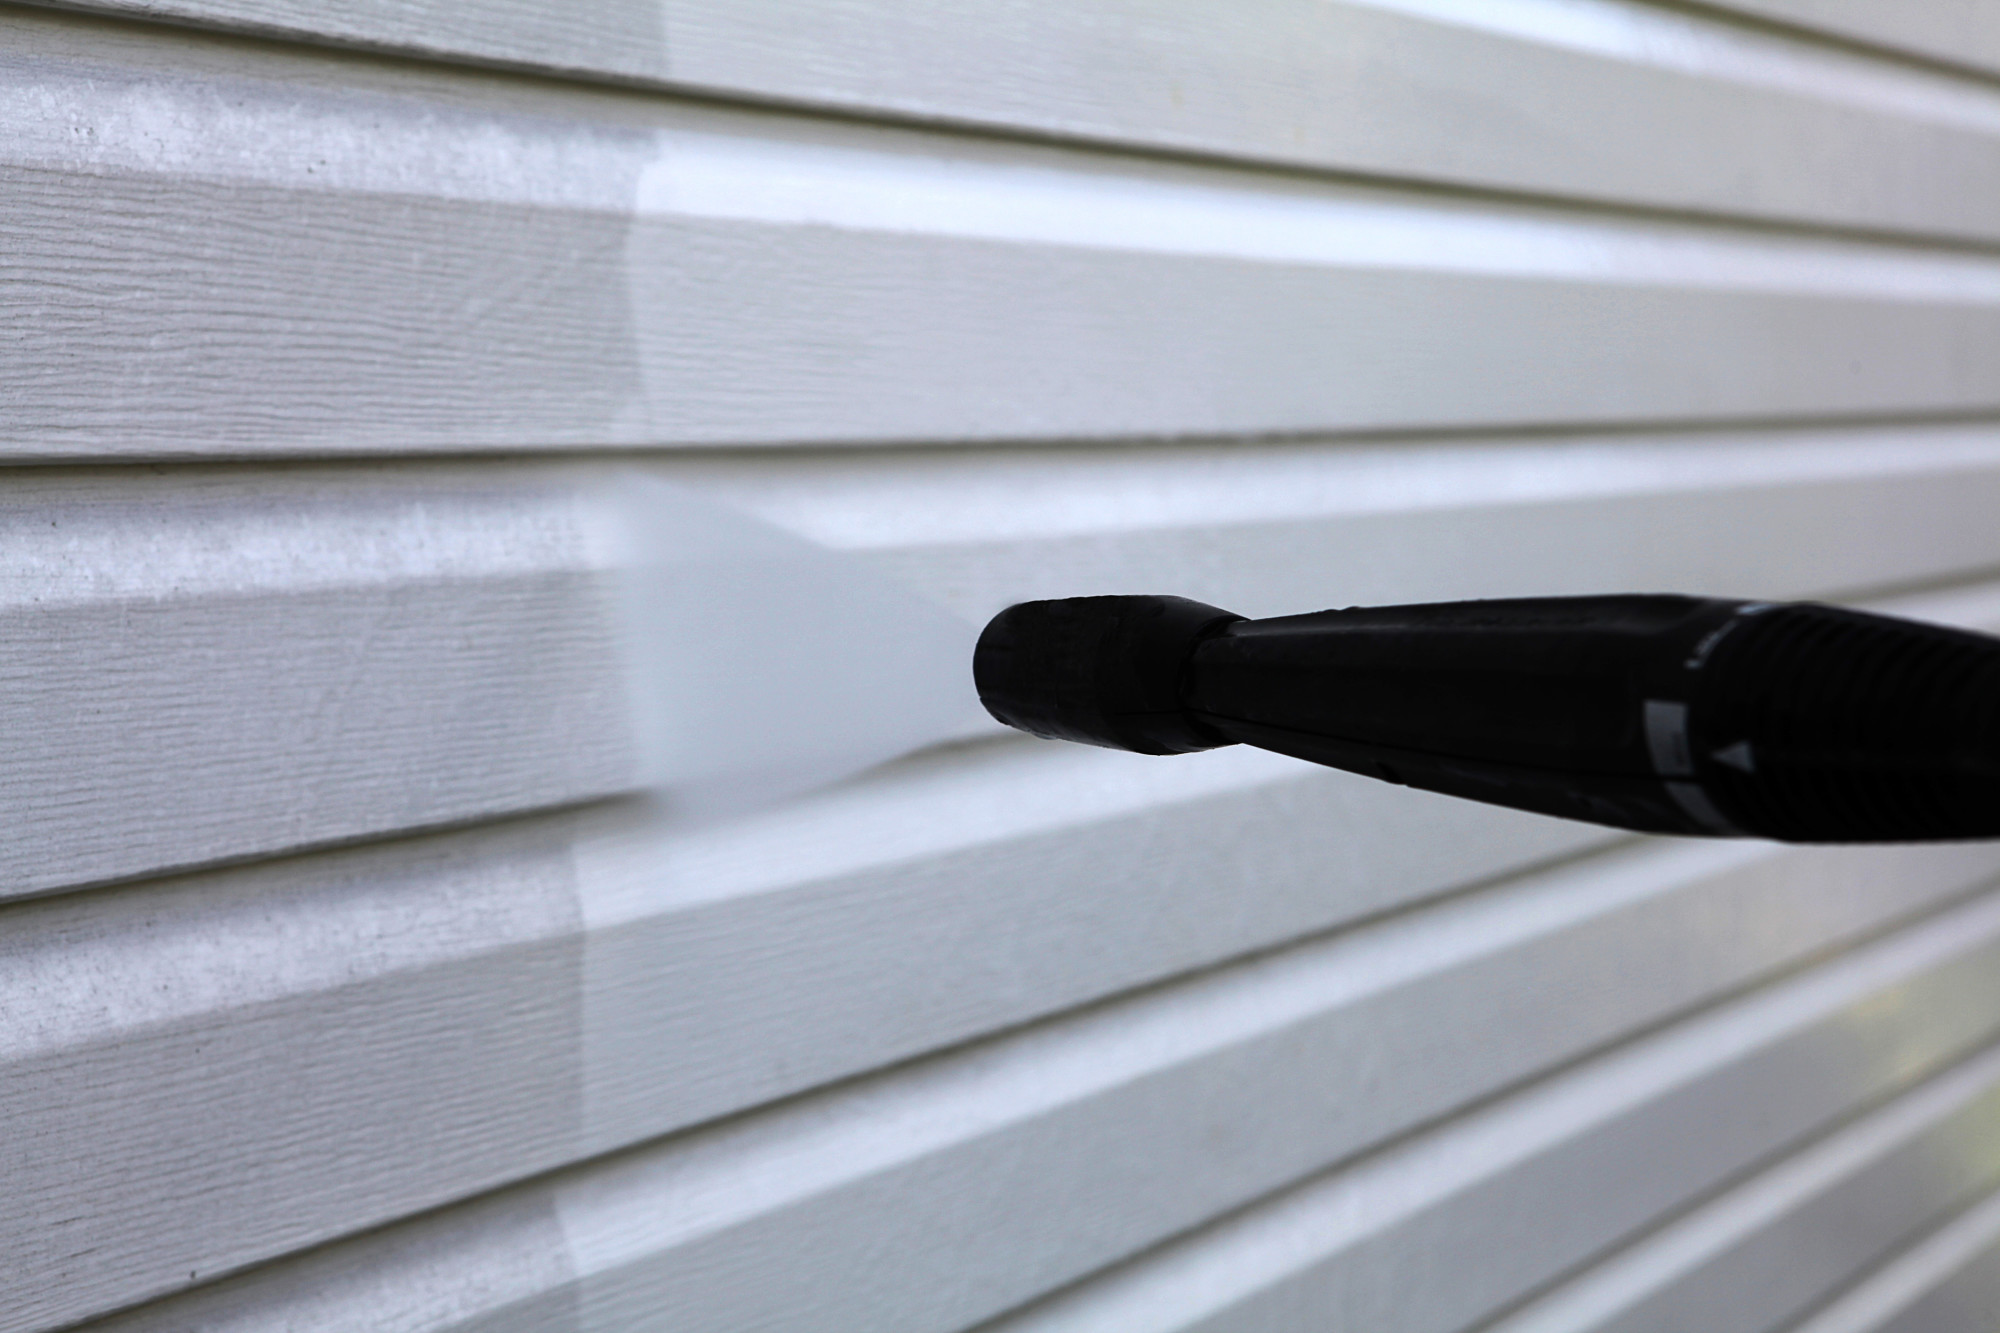 Vinyl is an excellent material for exterior siding, but exposure to stains and other elements can ruin it. Here's how to get stain off vinyl siding.